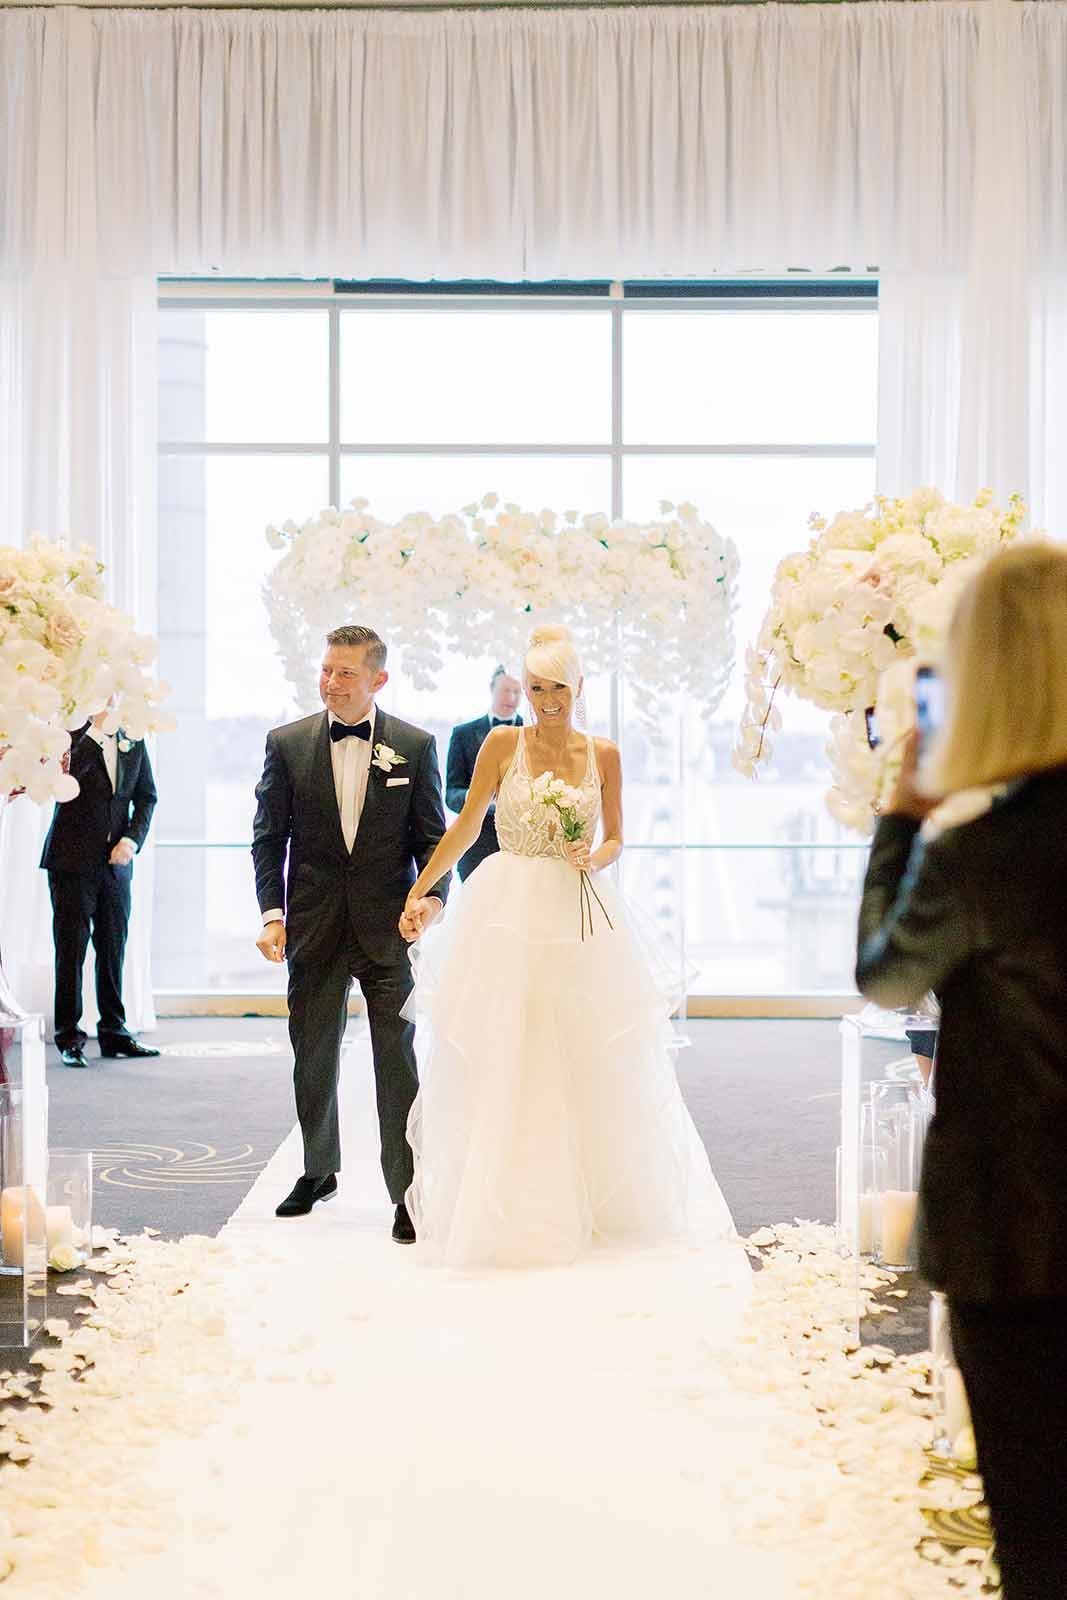 all white wedding ceremony and bride and groom walking down aisle with white orchid ceremony arch in back